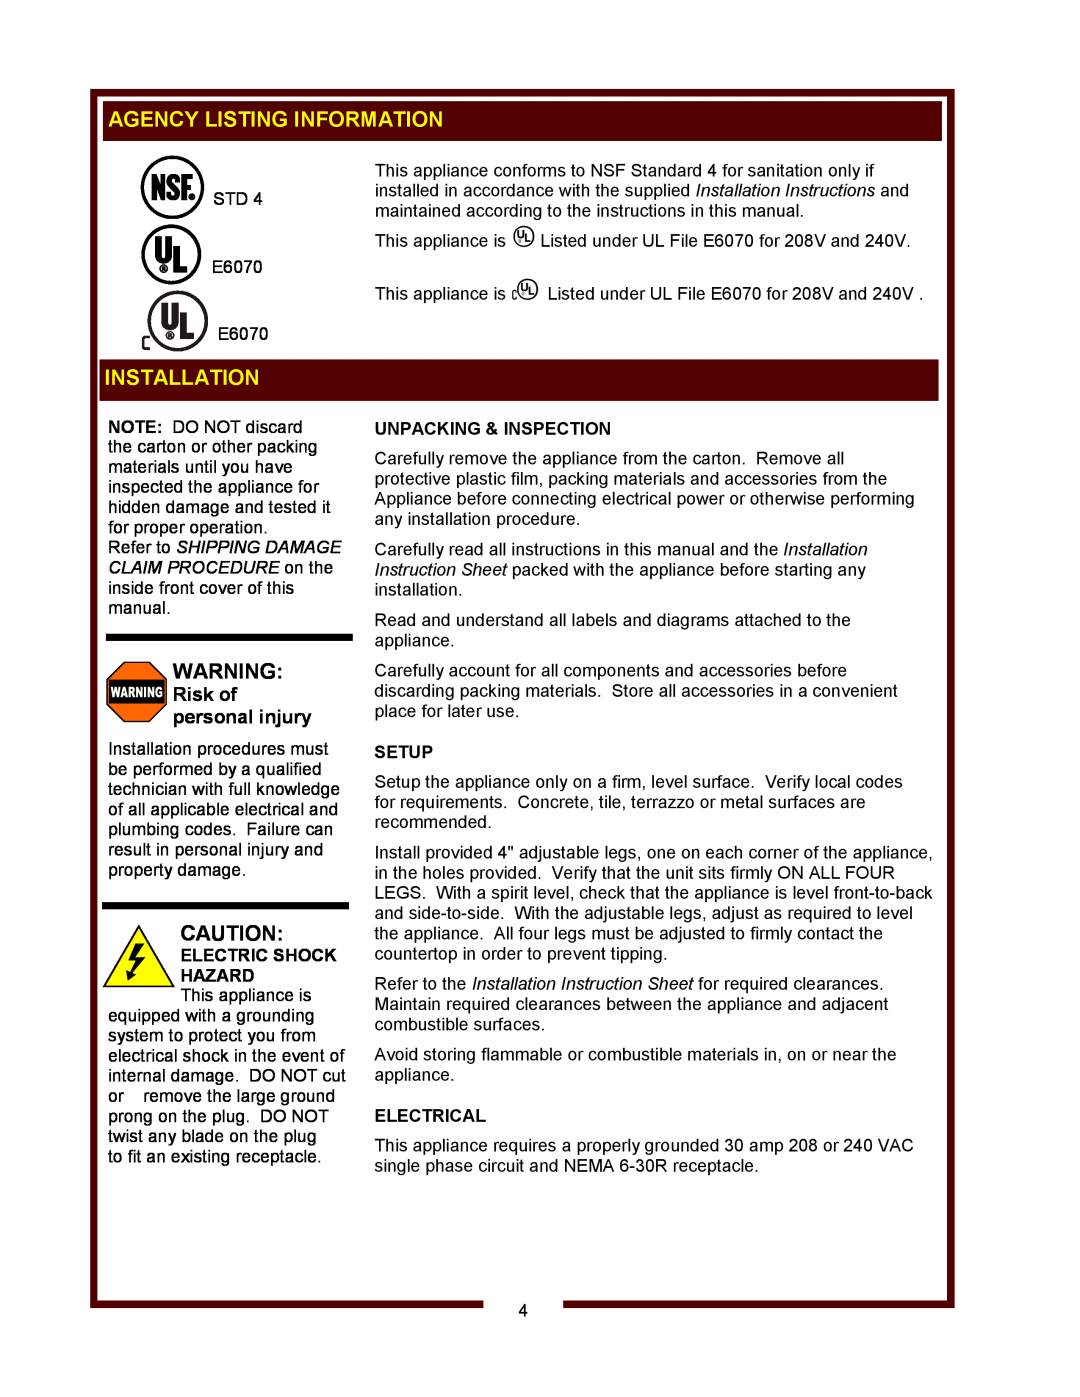 Wells FT-18 operation manual Agency Listing Information, Installation, Risk of personal injury 